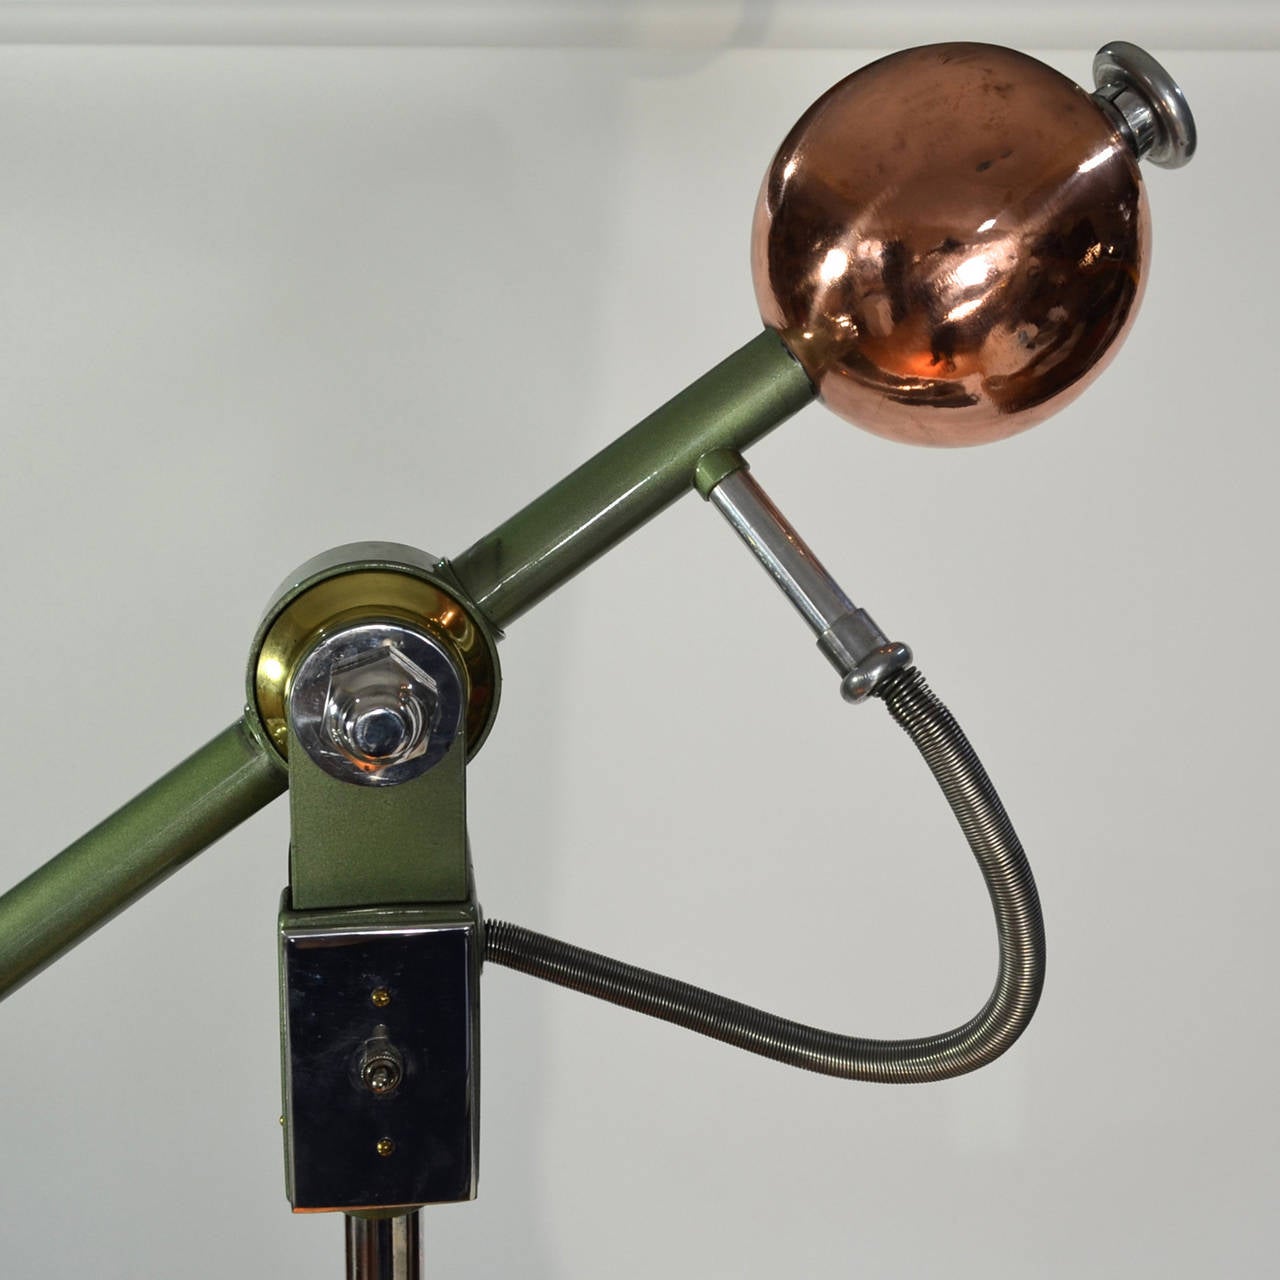 American Polished Industrial Medical Floor Lamp, 1940s, Ohio USA